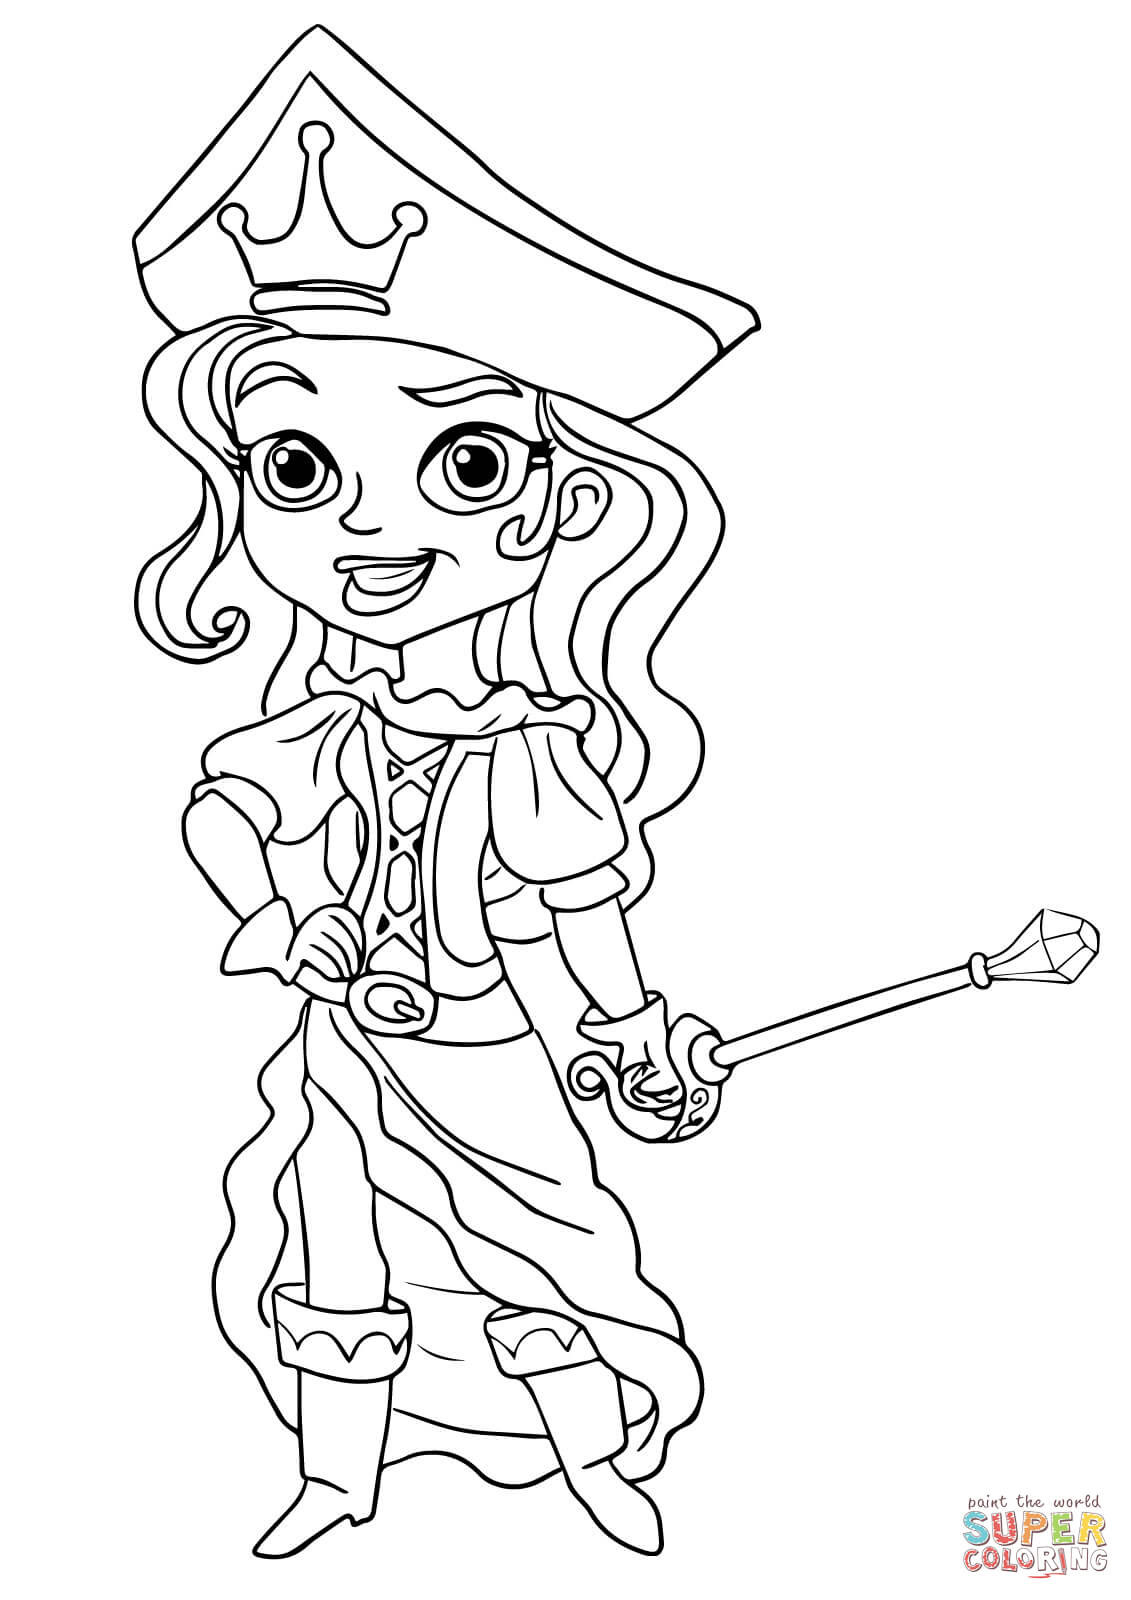 Jake And The Neverland Pirates Coloring Pages
 The Pirate Princess coloring page